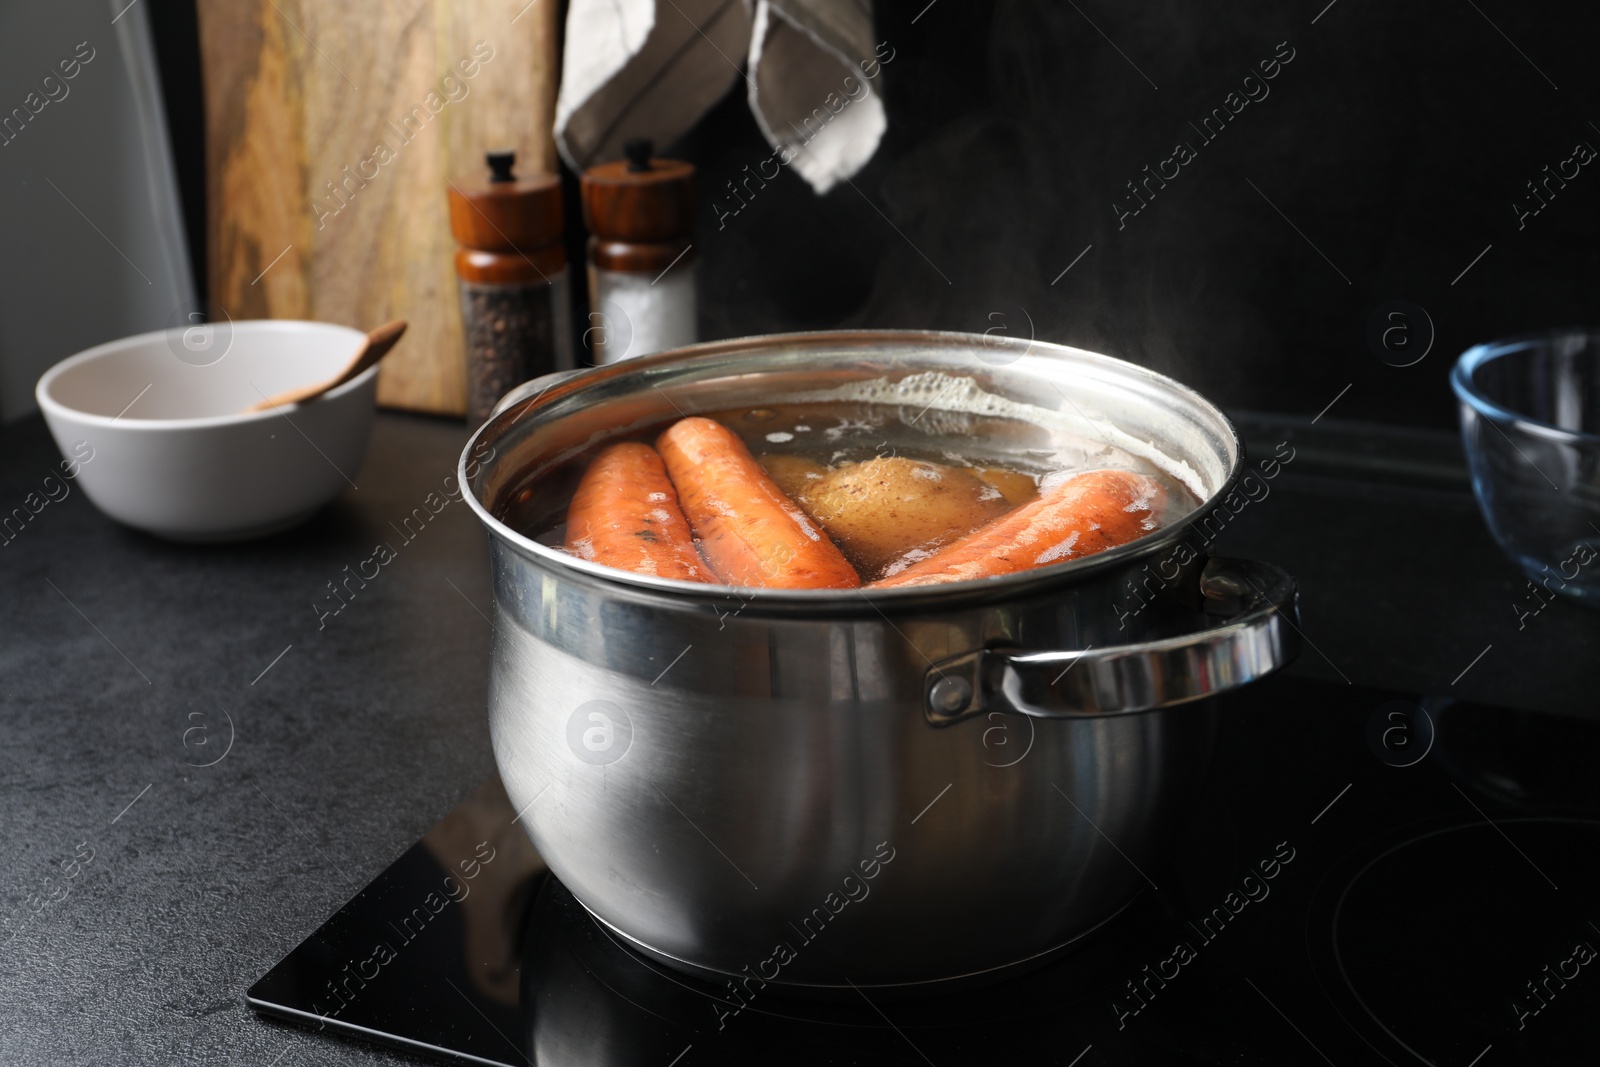 Photo of Boiling carrot and potatoes in pot on electric stove. Cooking vinaigrette salad